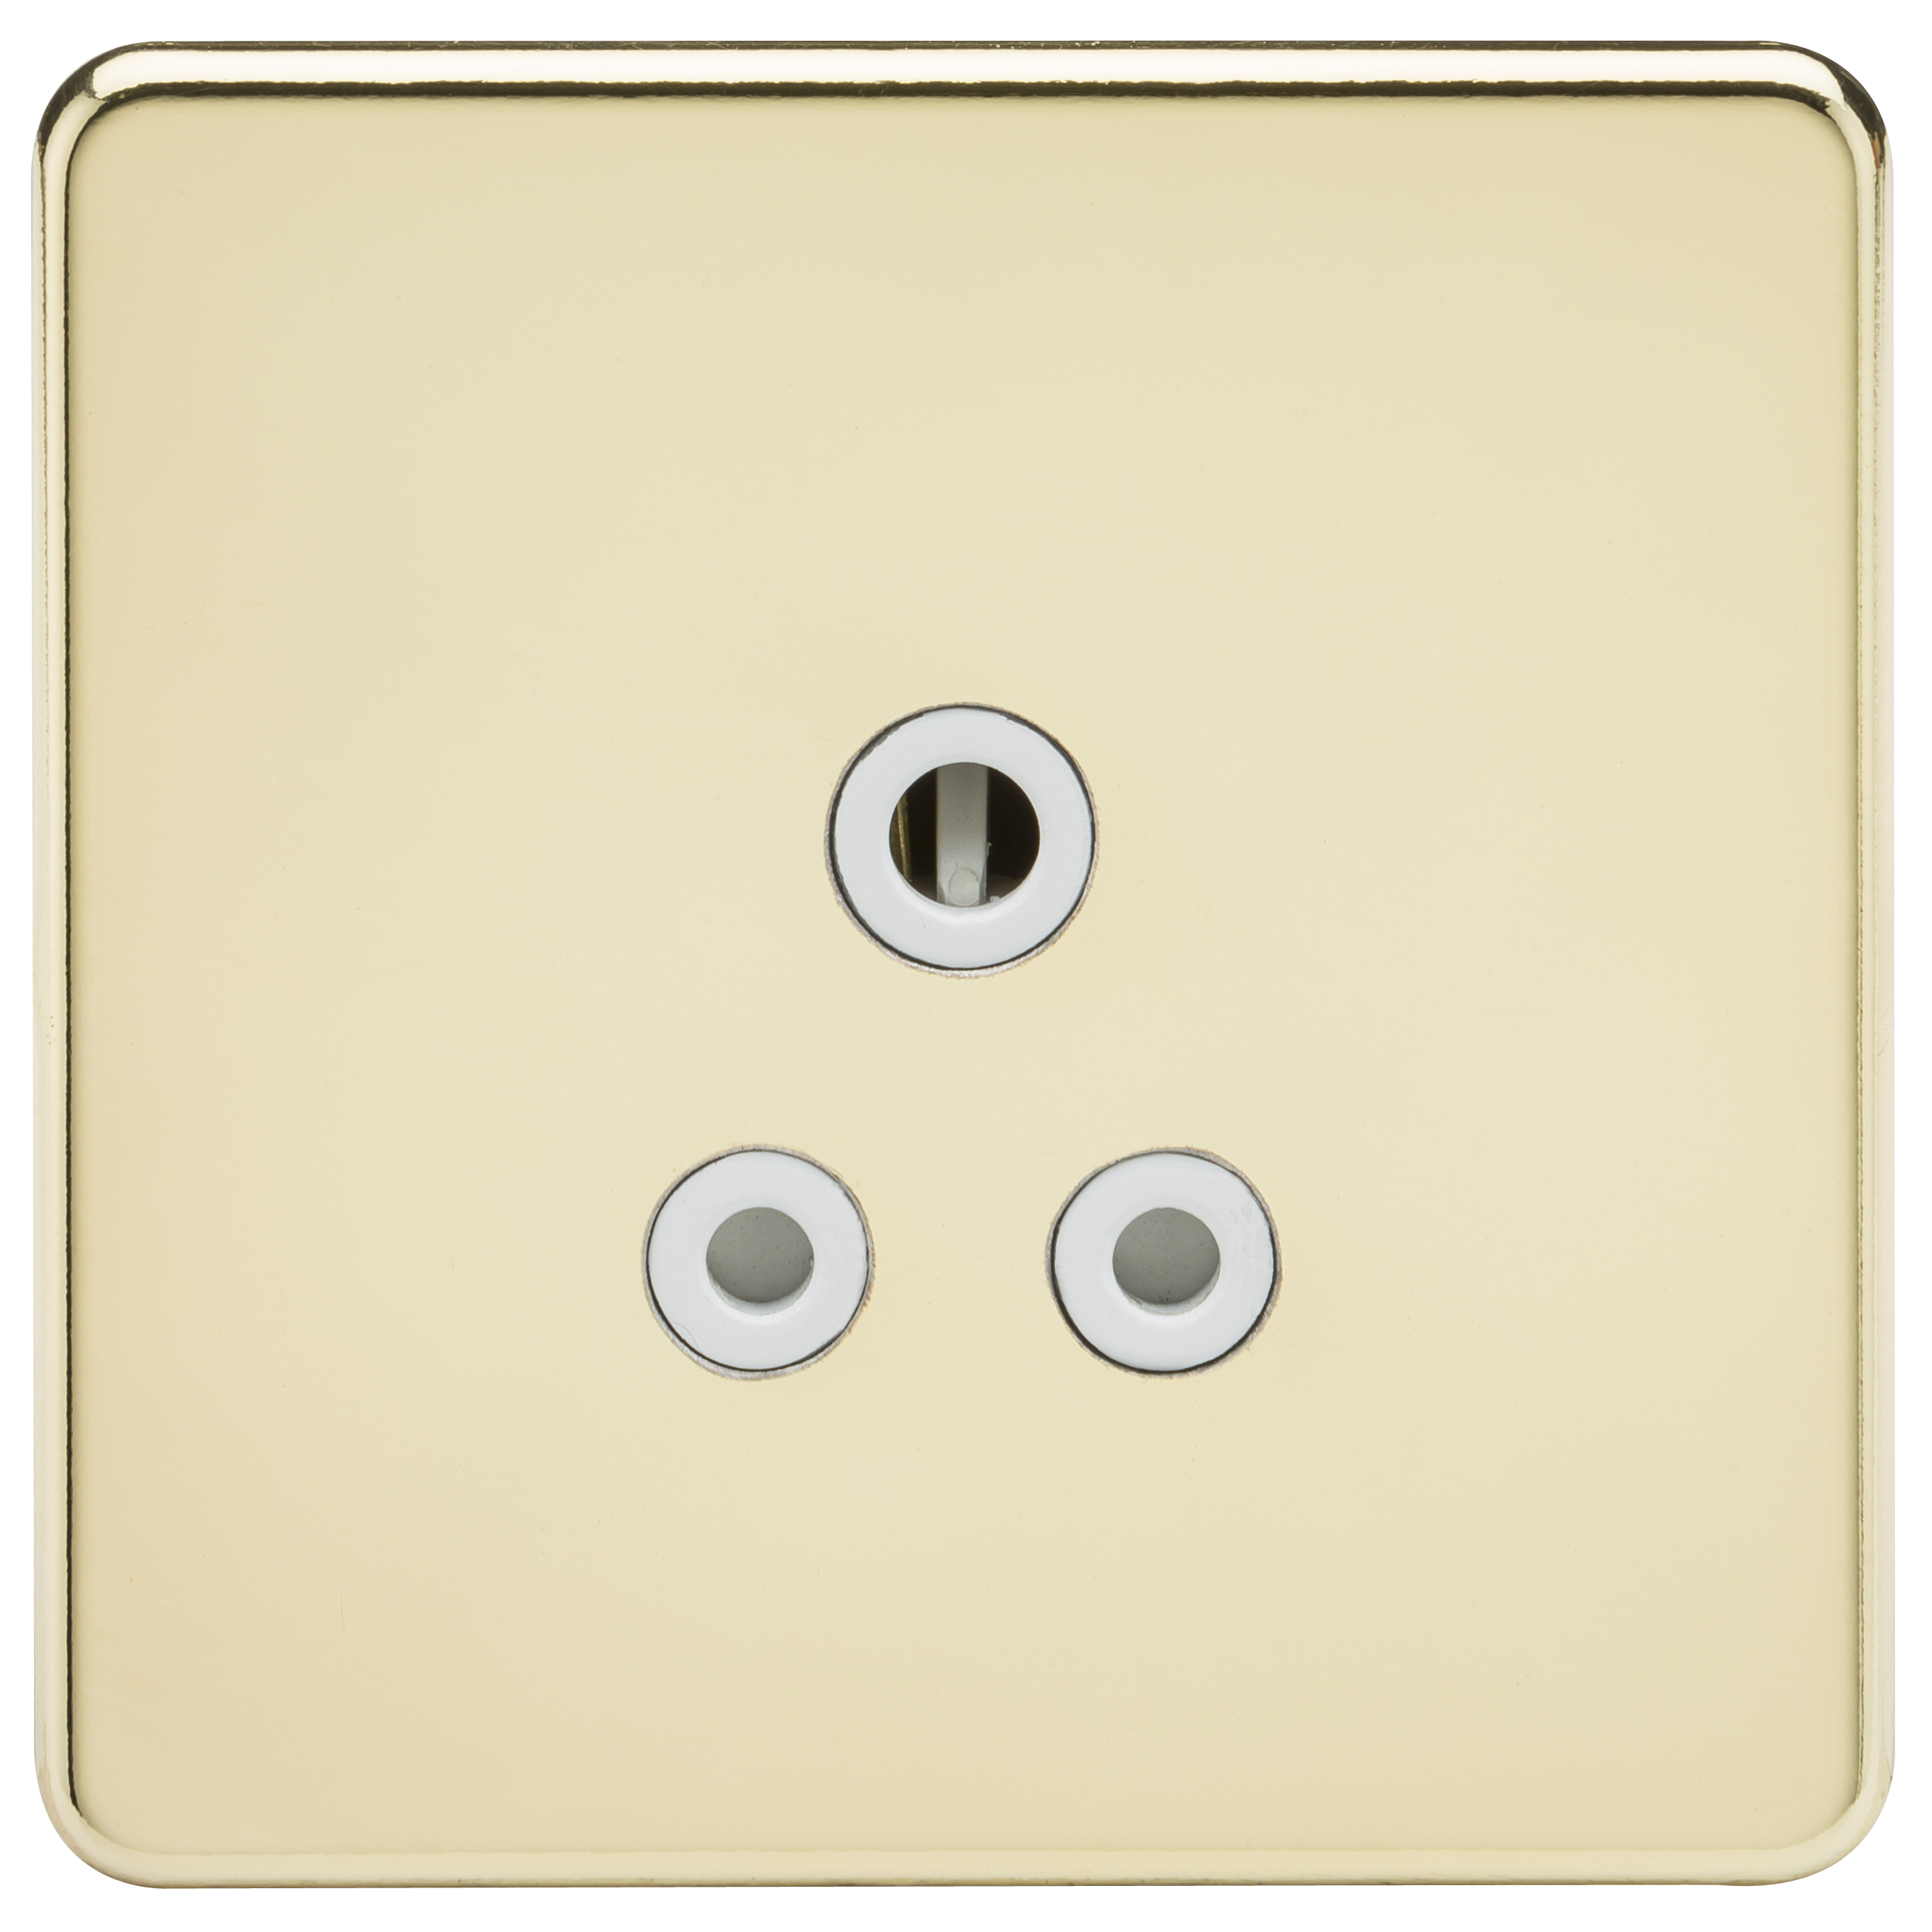 Screwless 5A Unswitched Socket - Polished Brass With White Insert - SF5APBW 